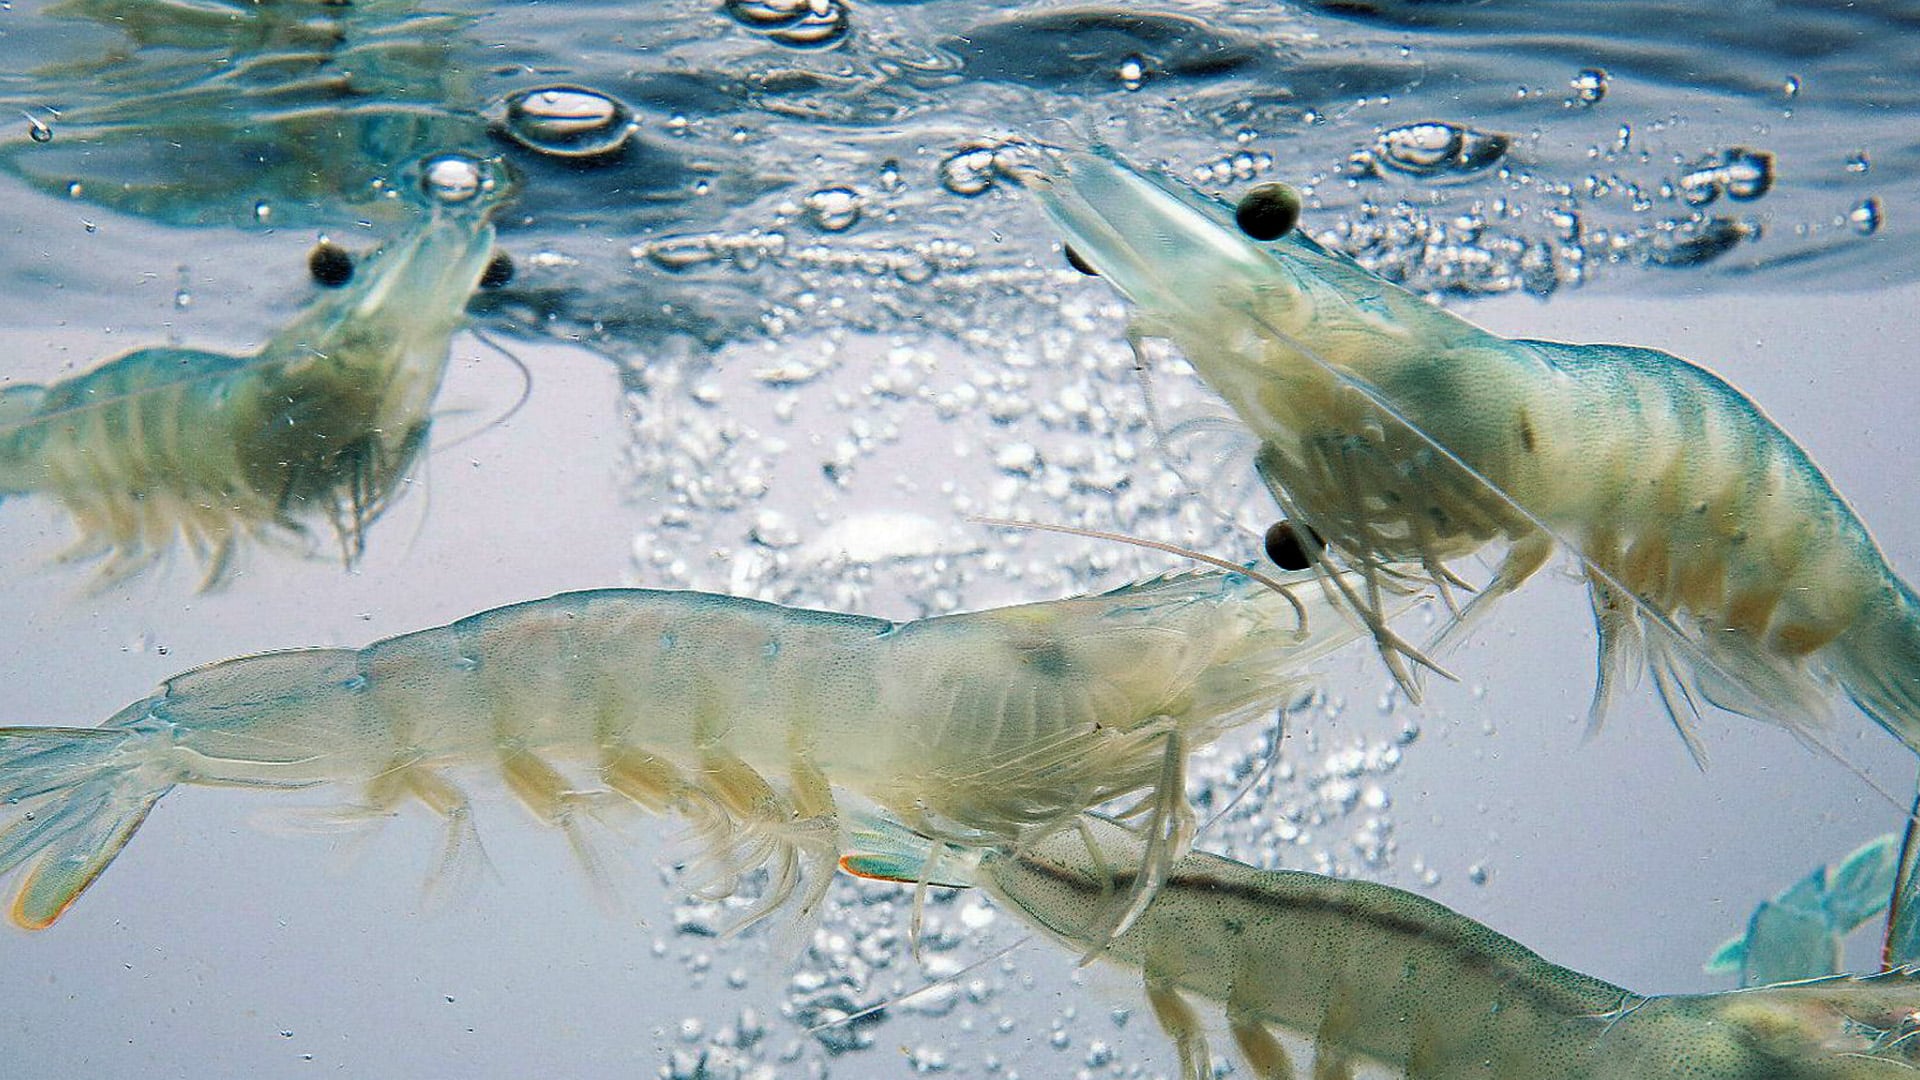 India seeks EU nod for export of aquaculture shrimps by newly listed firms